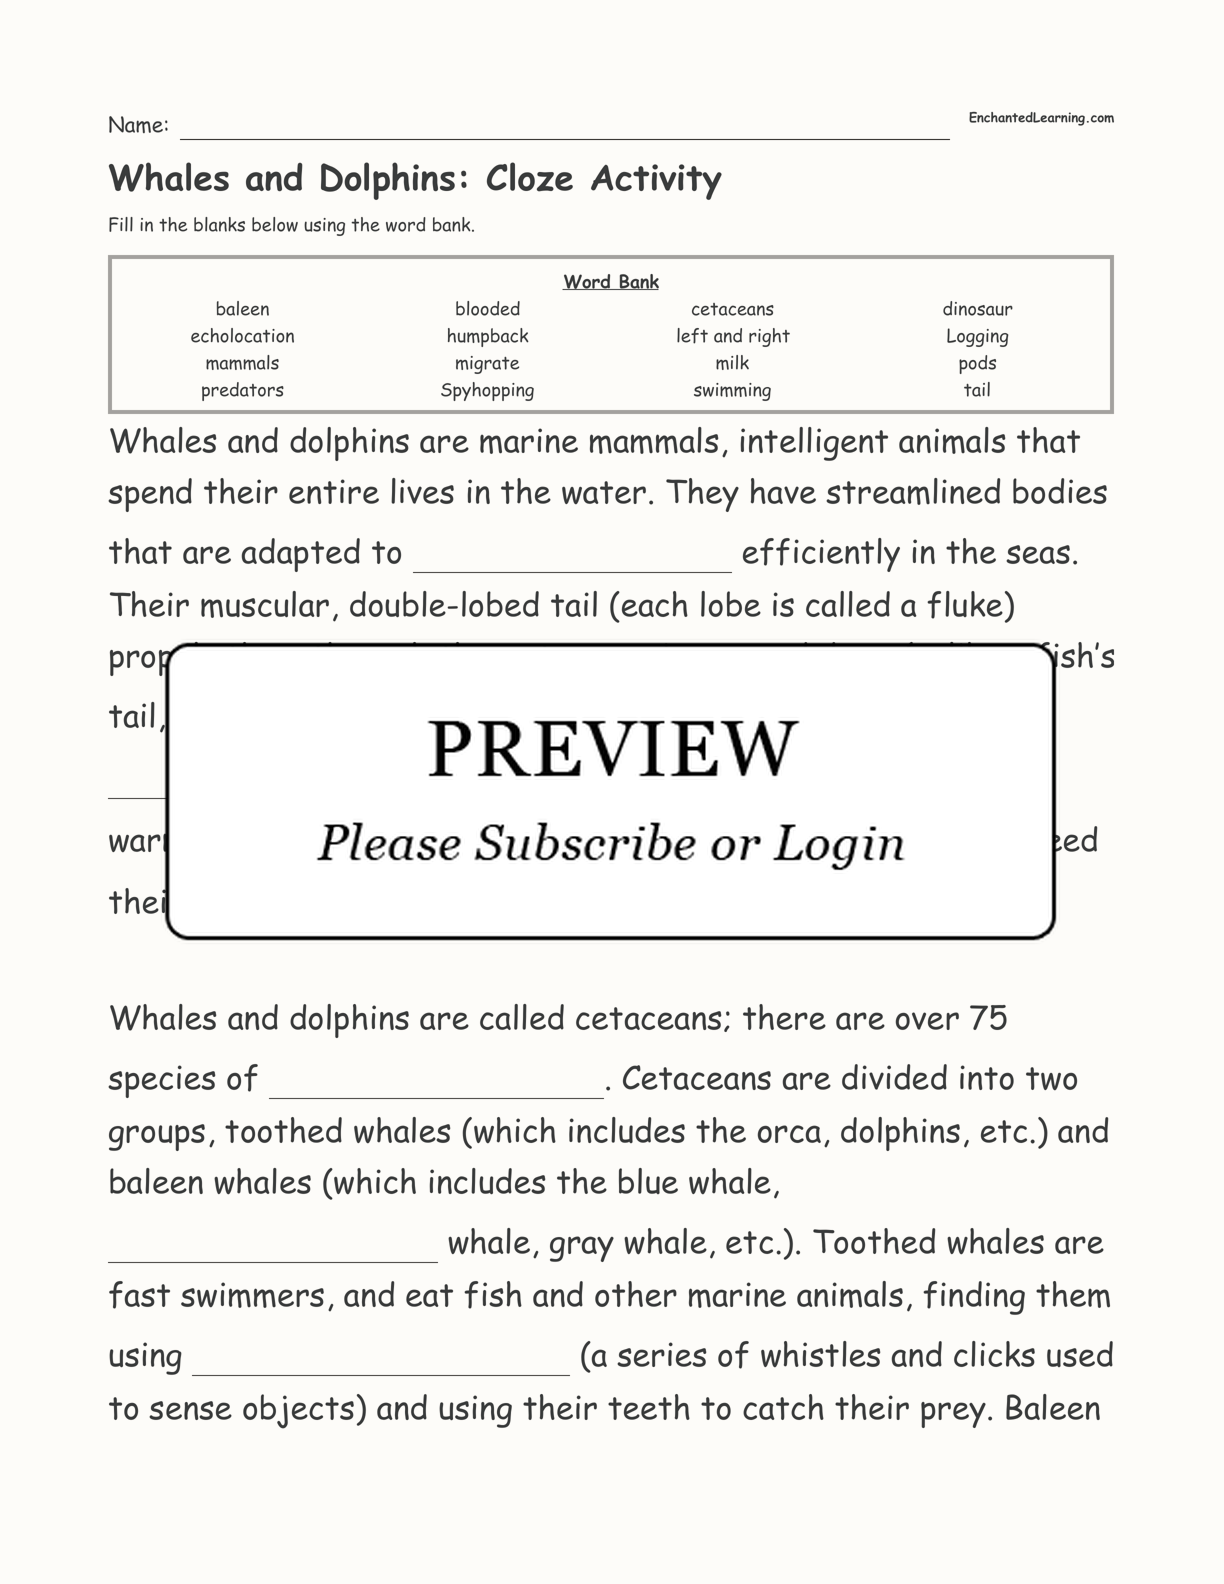 Whales and Dolphins: Cloze Activity interactive worksheet page 1